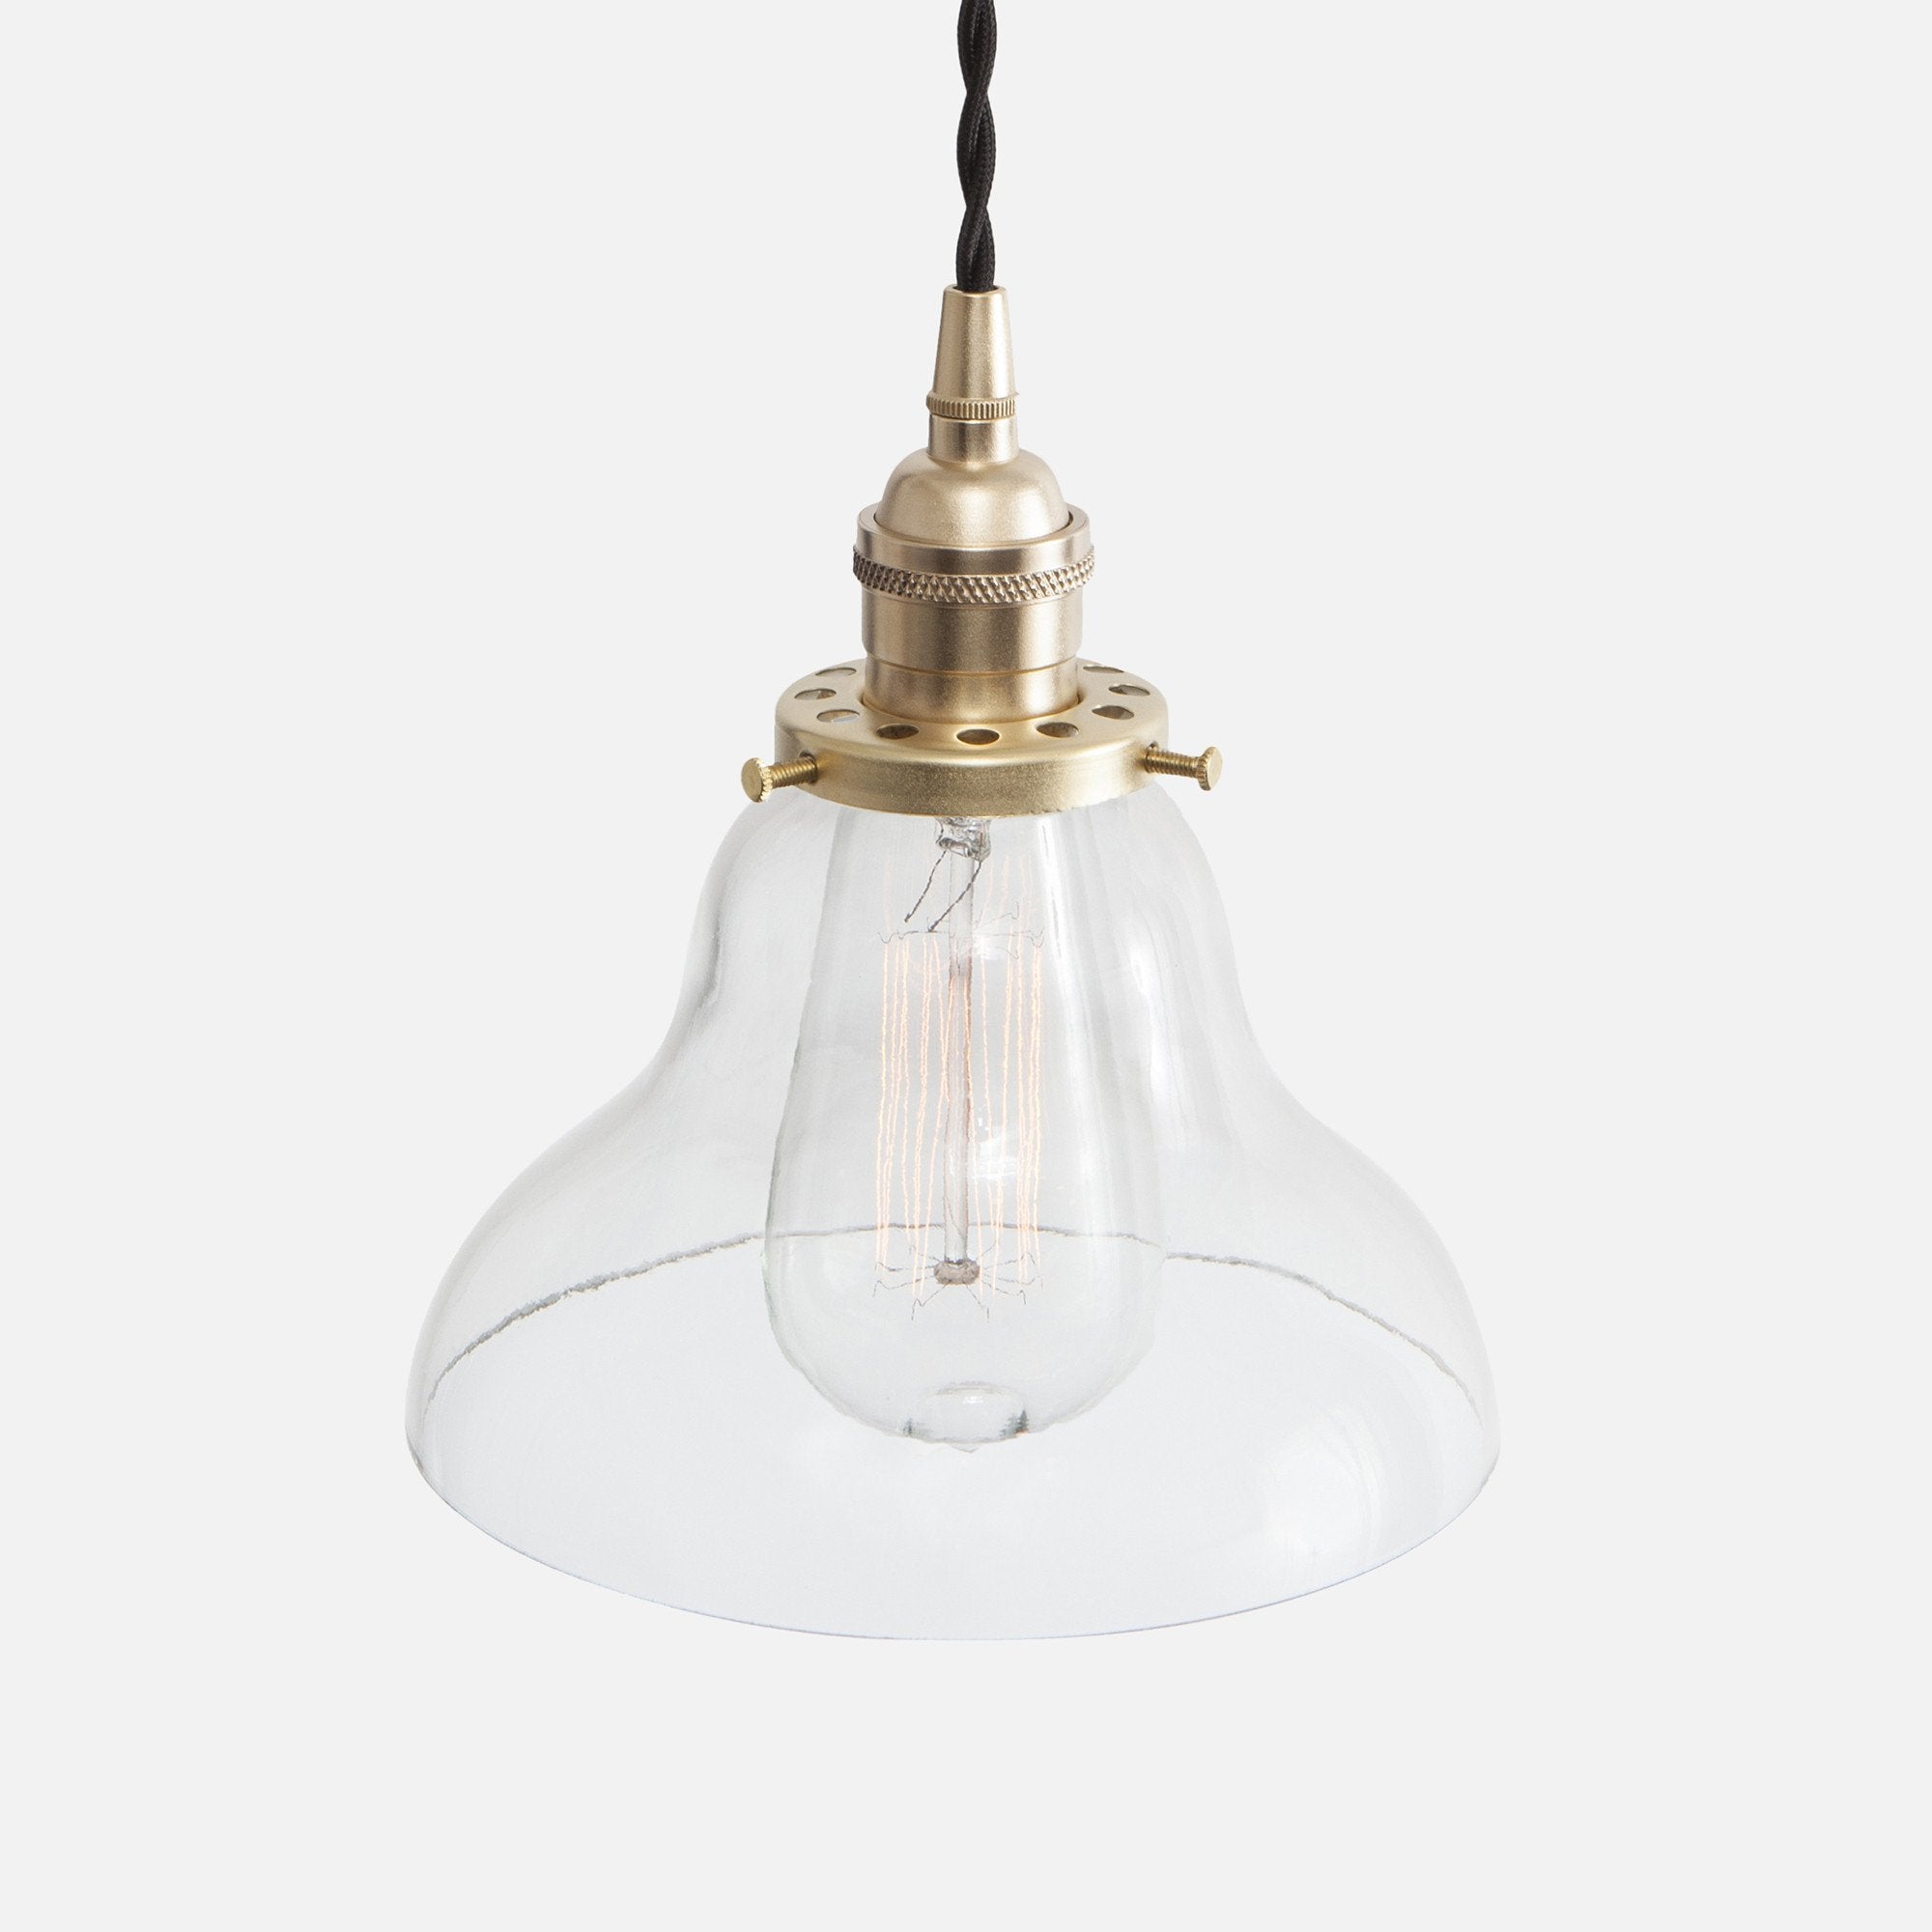 Vintage Socket Pendant Light - Clear Glass Curved Bell Cone Shade - Raw Brass Patina